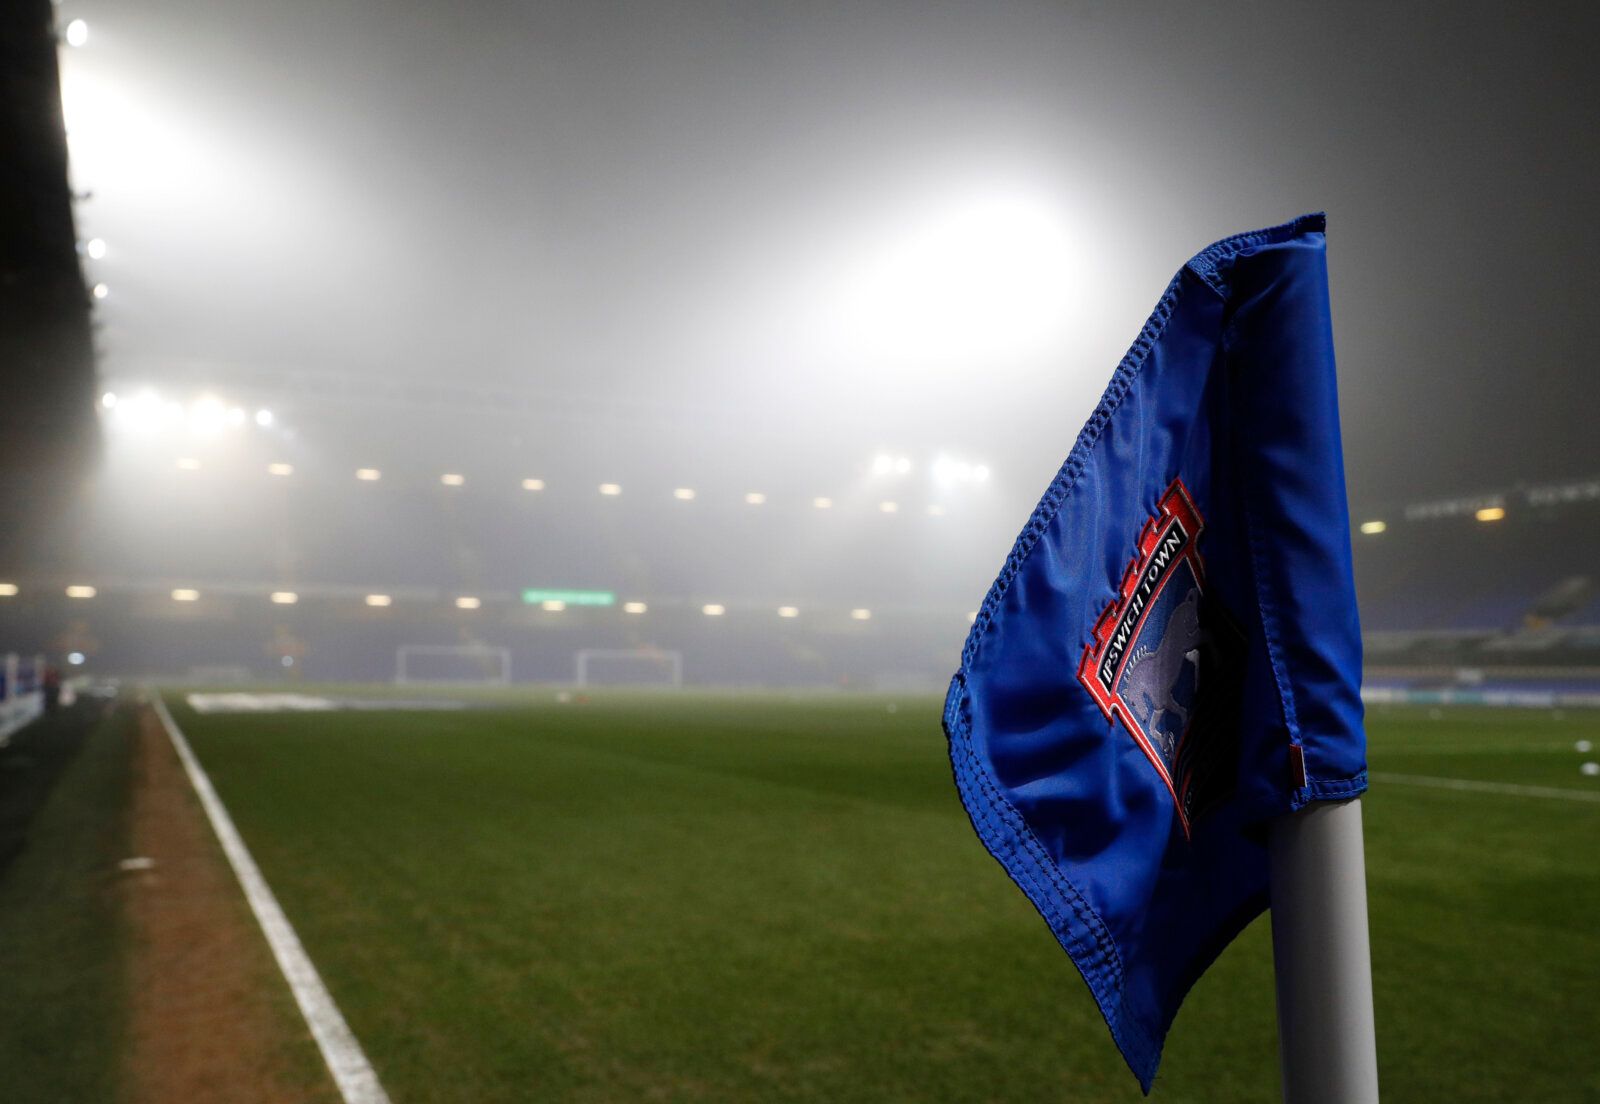 Britain Football Soccer - Ipswich Town v Bristol City - Sky Bet Championship - Portman Road - 30/12/16 General view of fog before the match  Mandatory Credit: Action Images / John Sibley Livepic EDITORIAL USE ONLY. No use with unauthorized audio, video, data, fixture lists, club/league logos or "live" services. Online in-match use limited to 45 images, no video emulation. No use in betting, games or single club/league/player publications. Please contact your account representative for further de